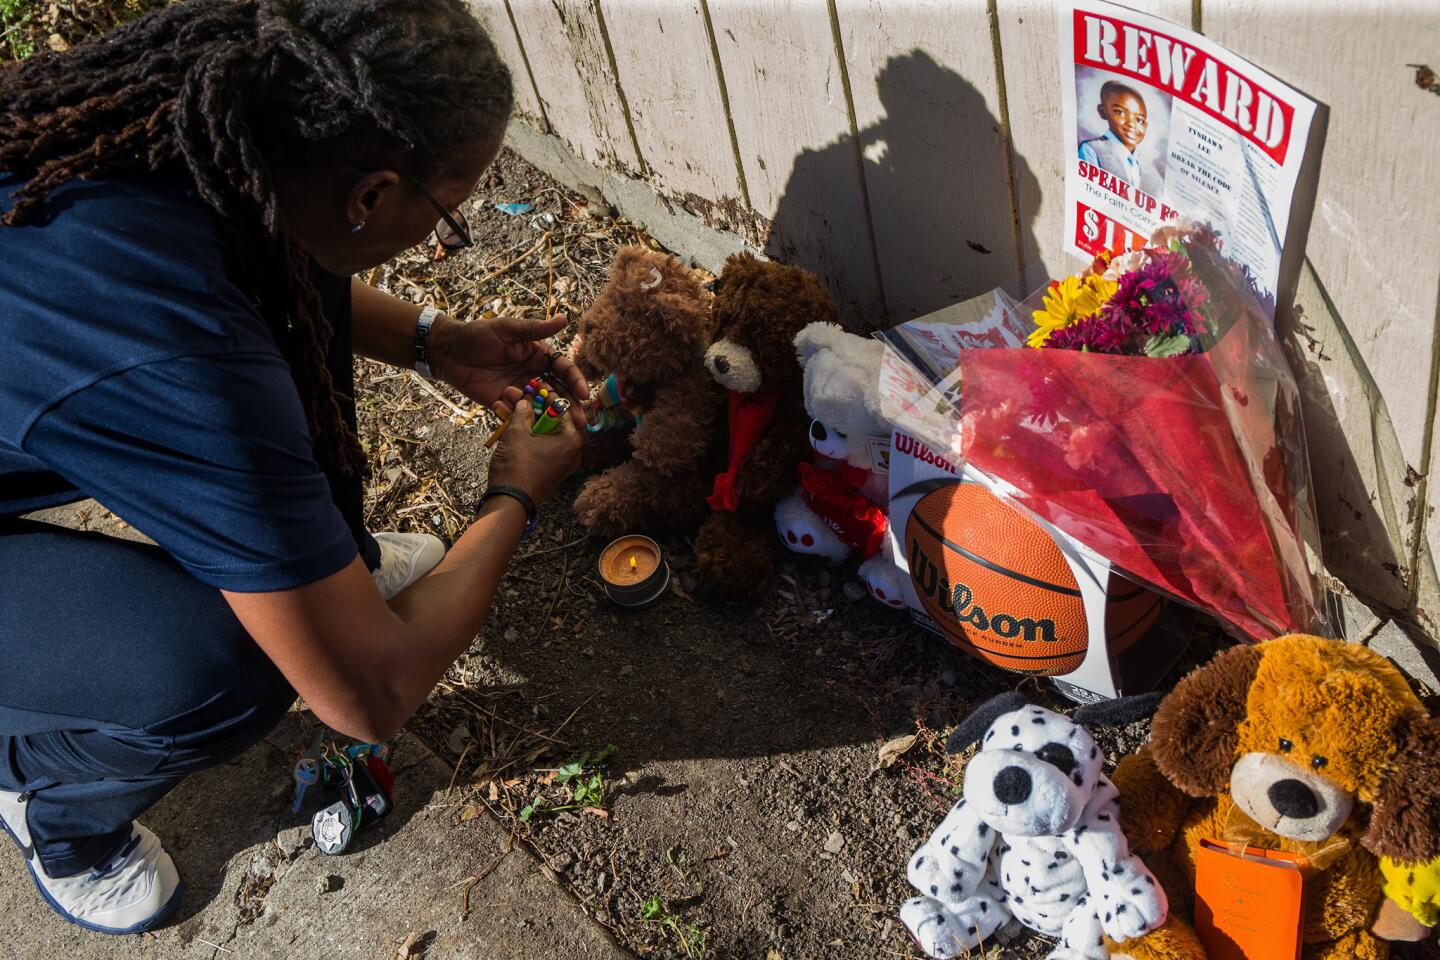 A member of St. Sabina Catholic Church prays Nov. 3, 2015, in the alley in the Gresham neighborhood where Tyshawn Lee, 9, was fatally shot a day earlier.